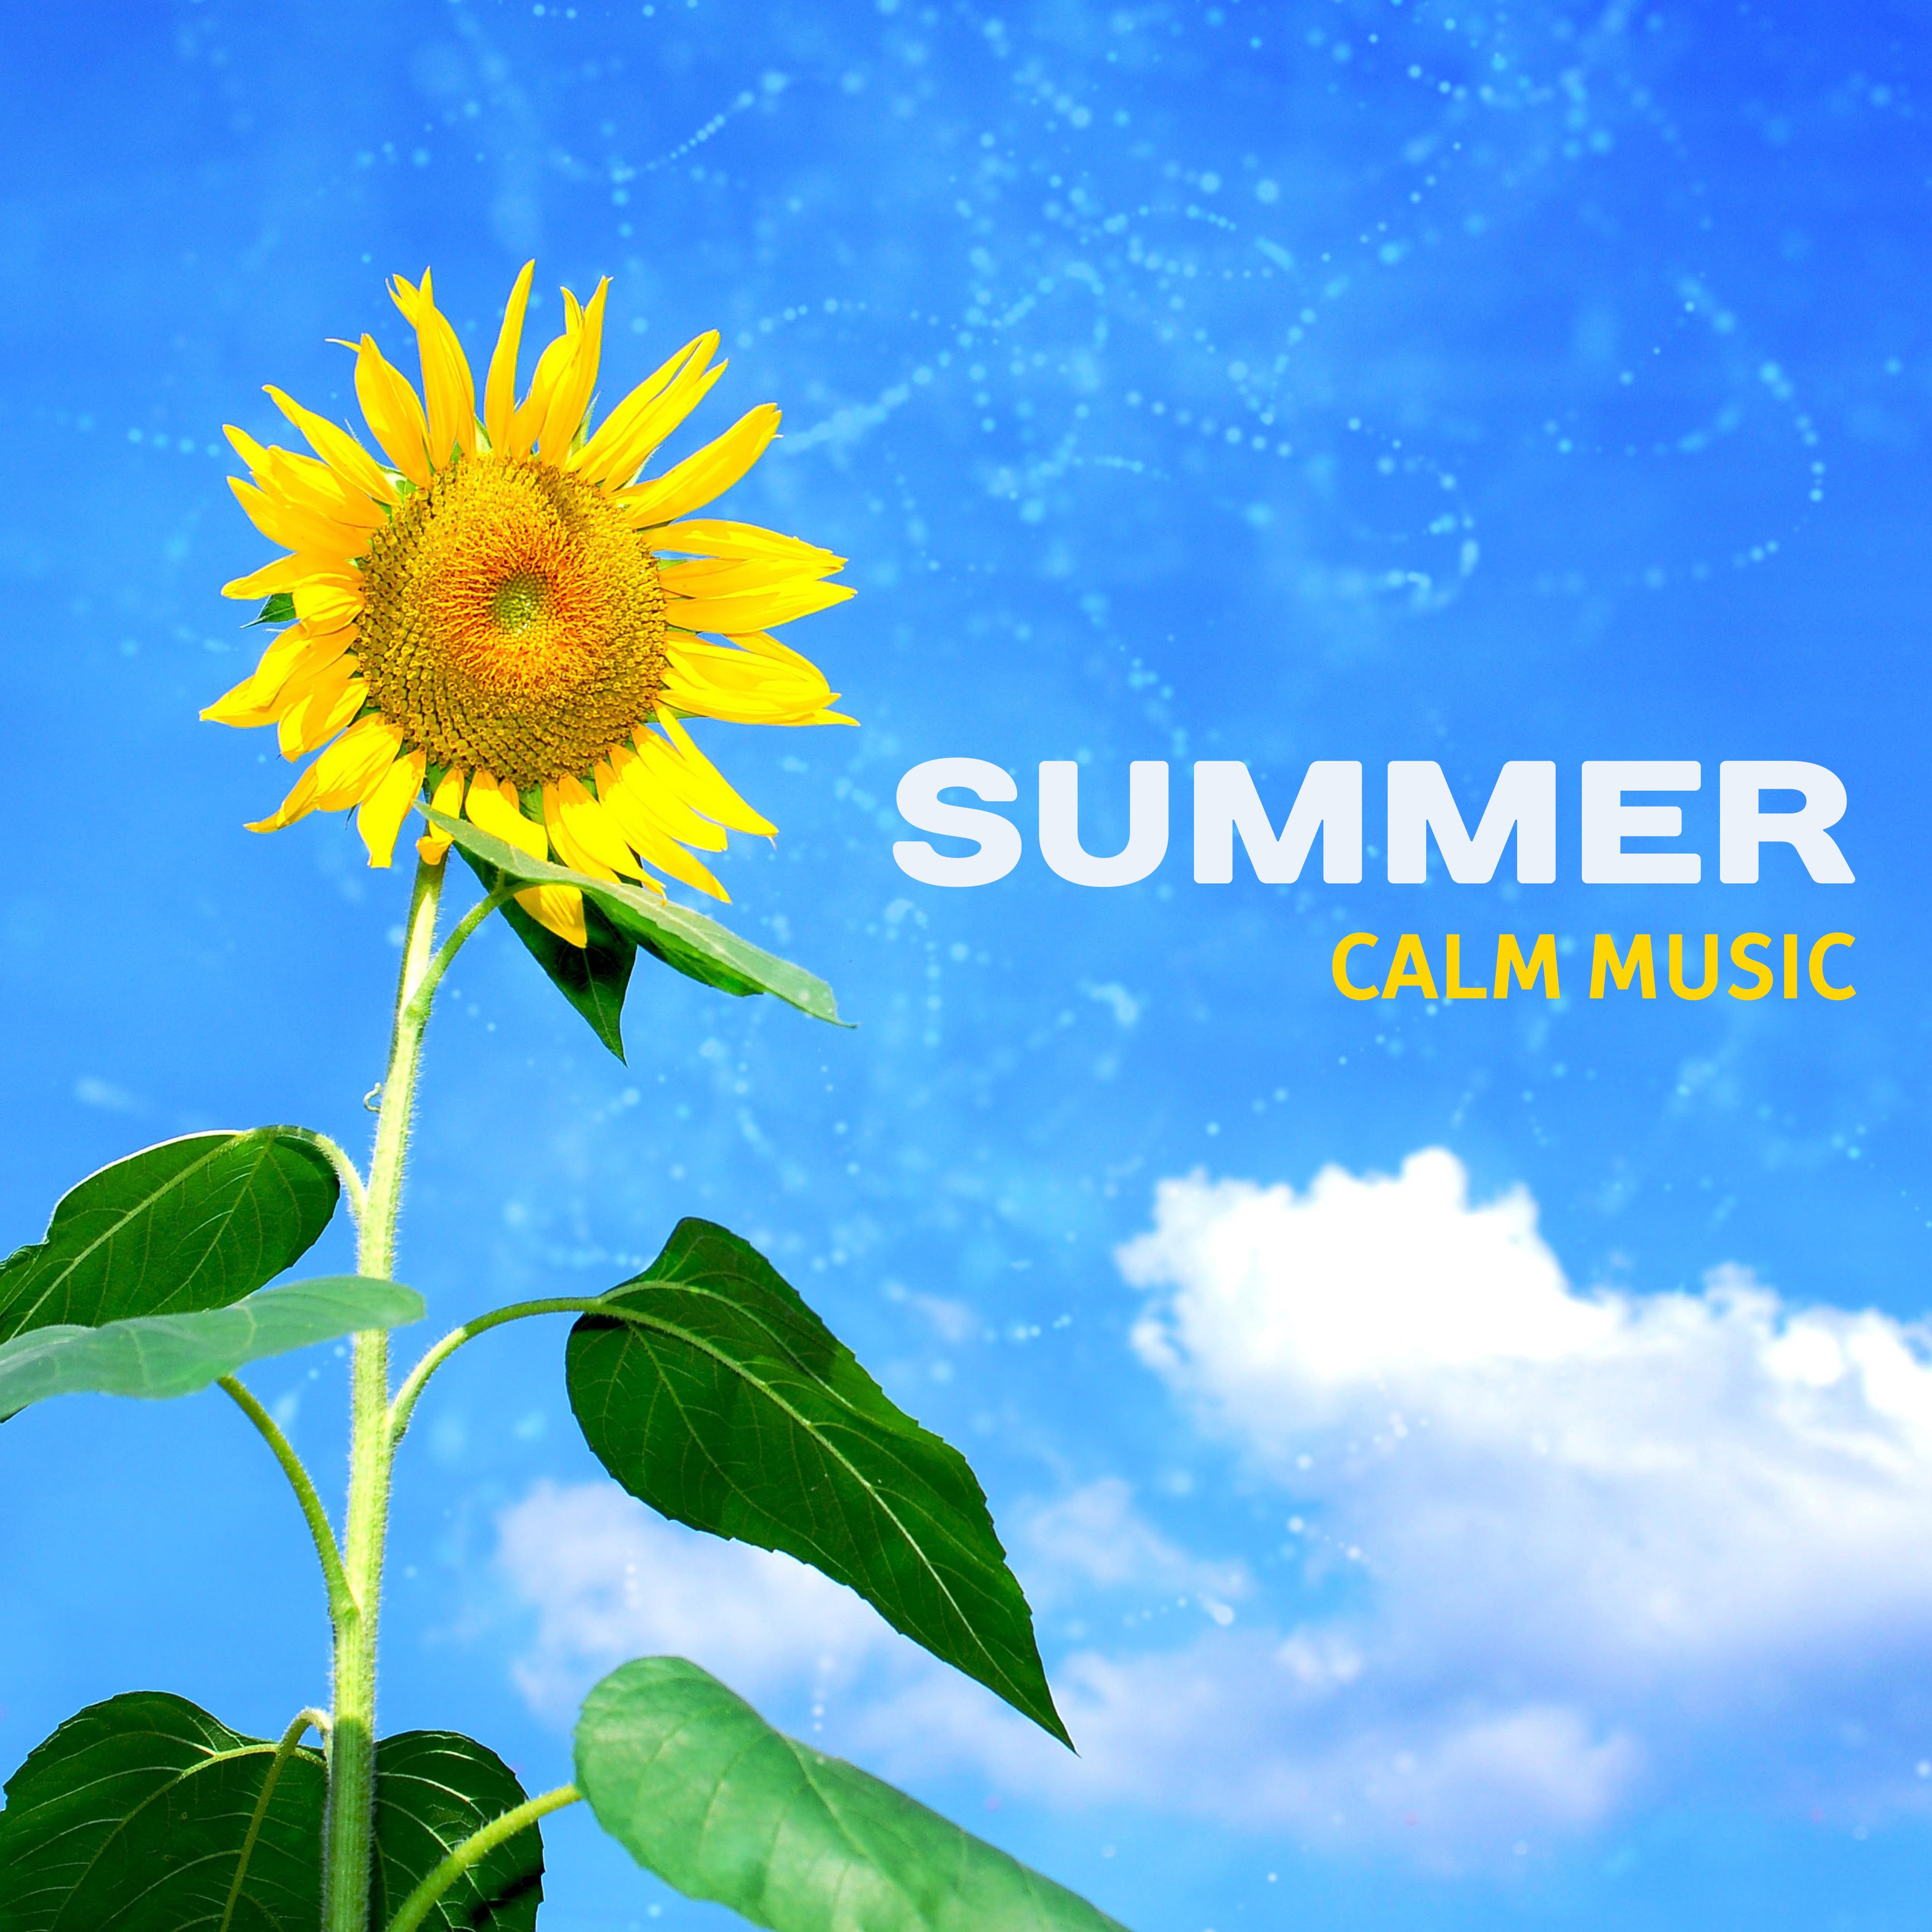 Summer Calm Music – Chill Out Vibes to Relax, Rest on the Beach, Tropical Sounds, Music to Calm Mind